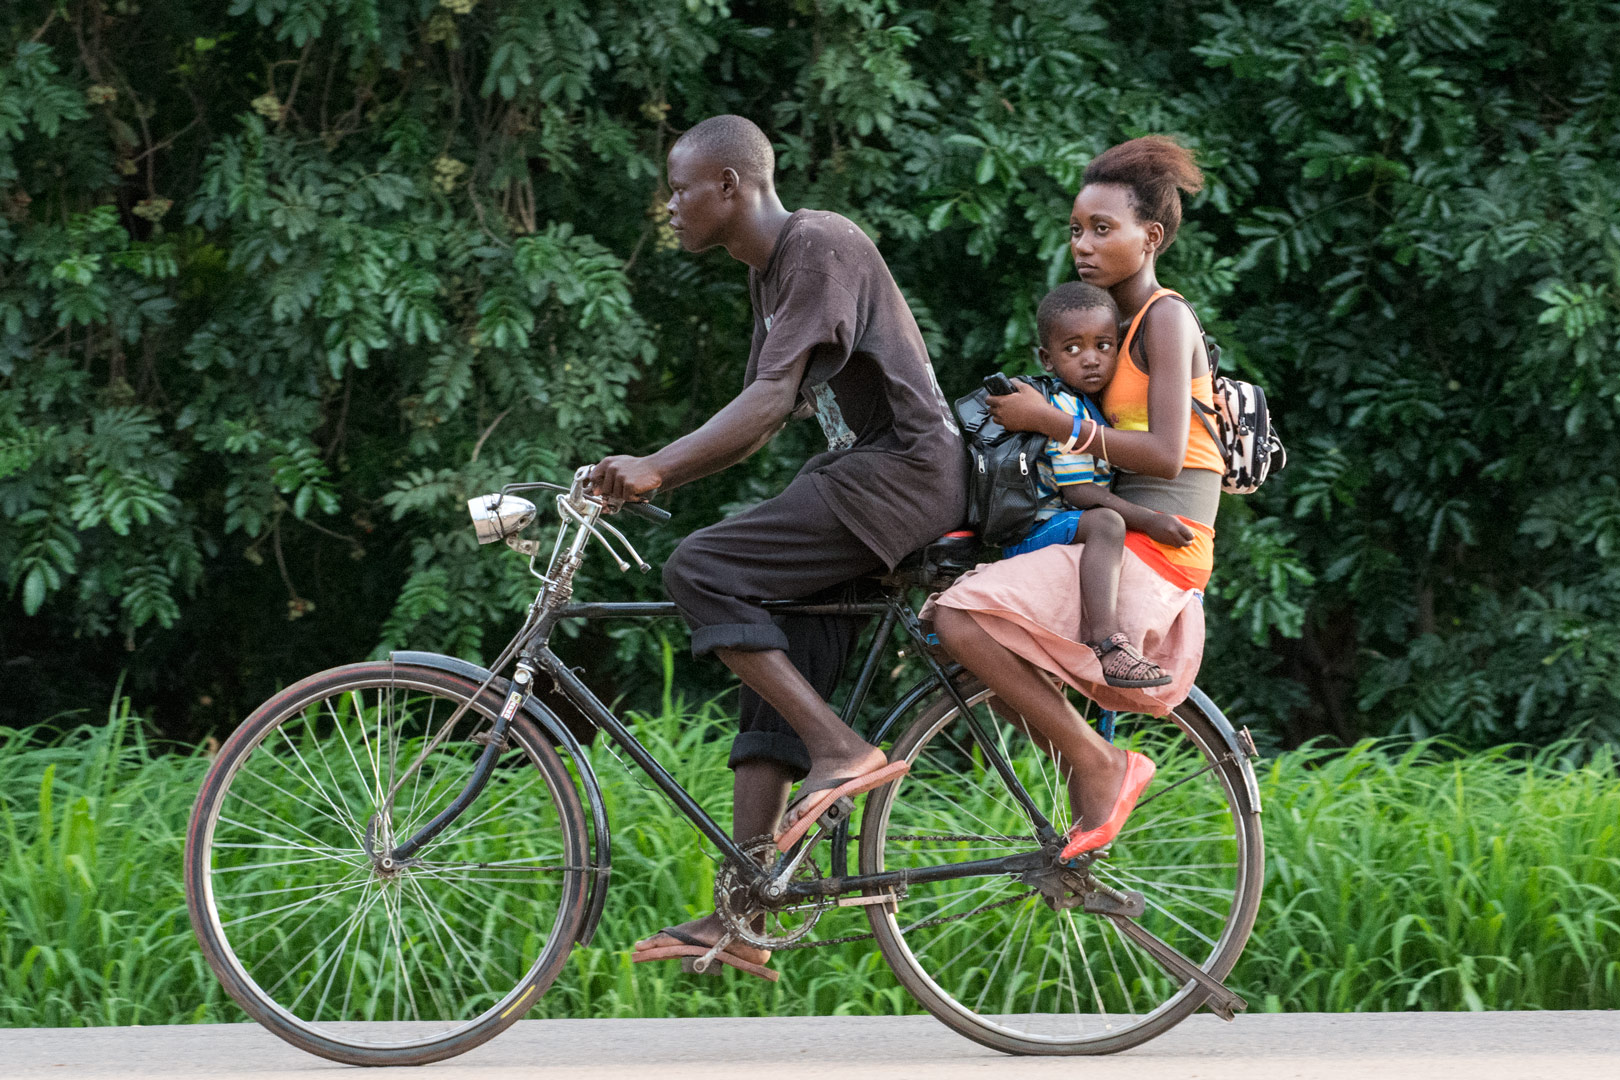 East Africa bicycle culture photo gallery - Paul Jeurissen Bicycle ...